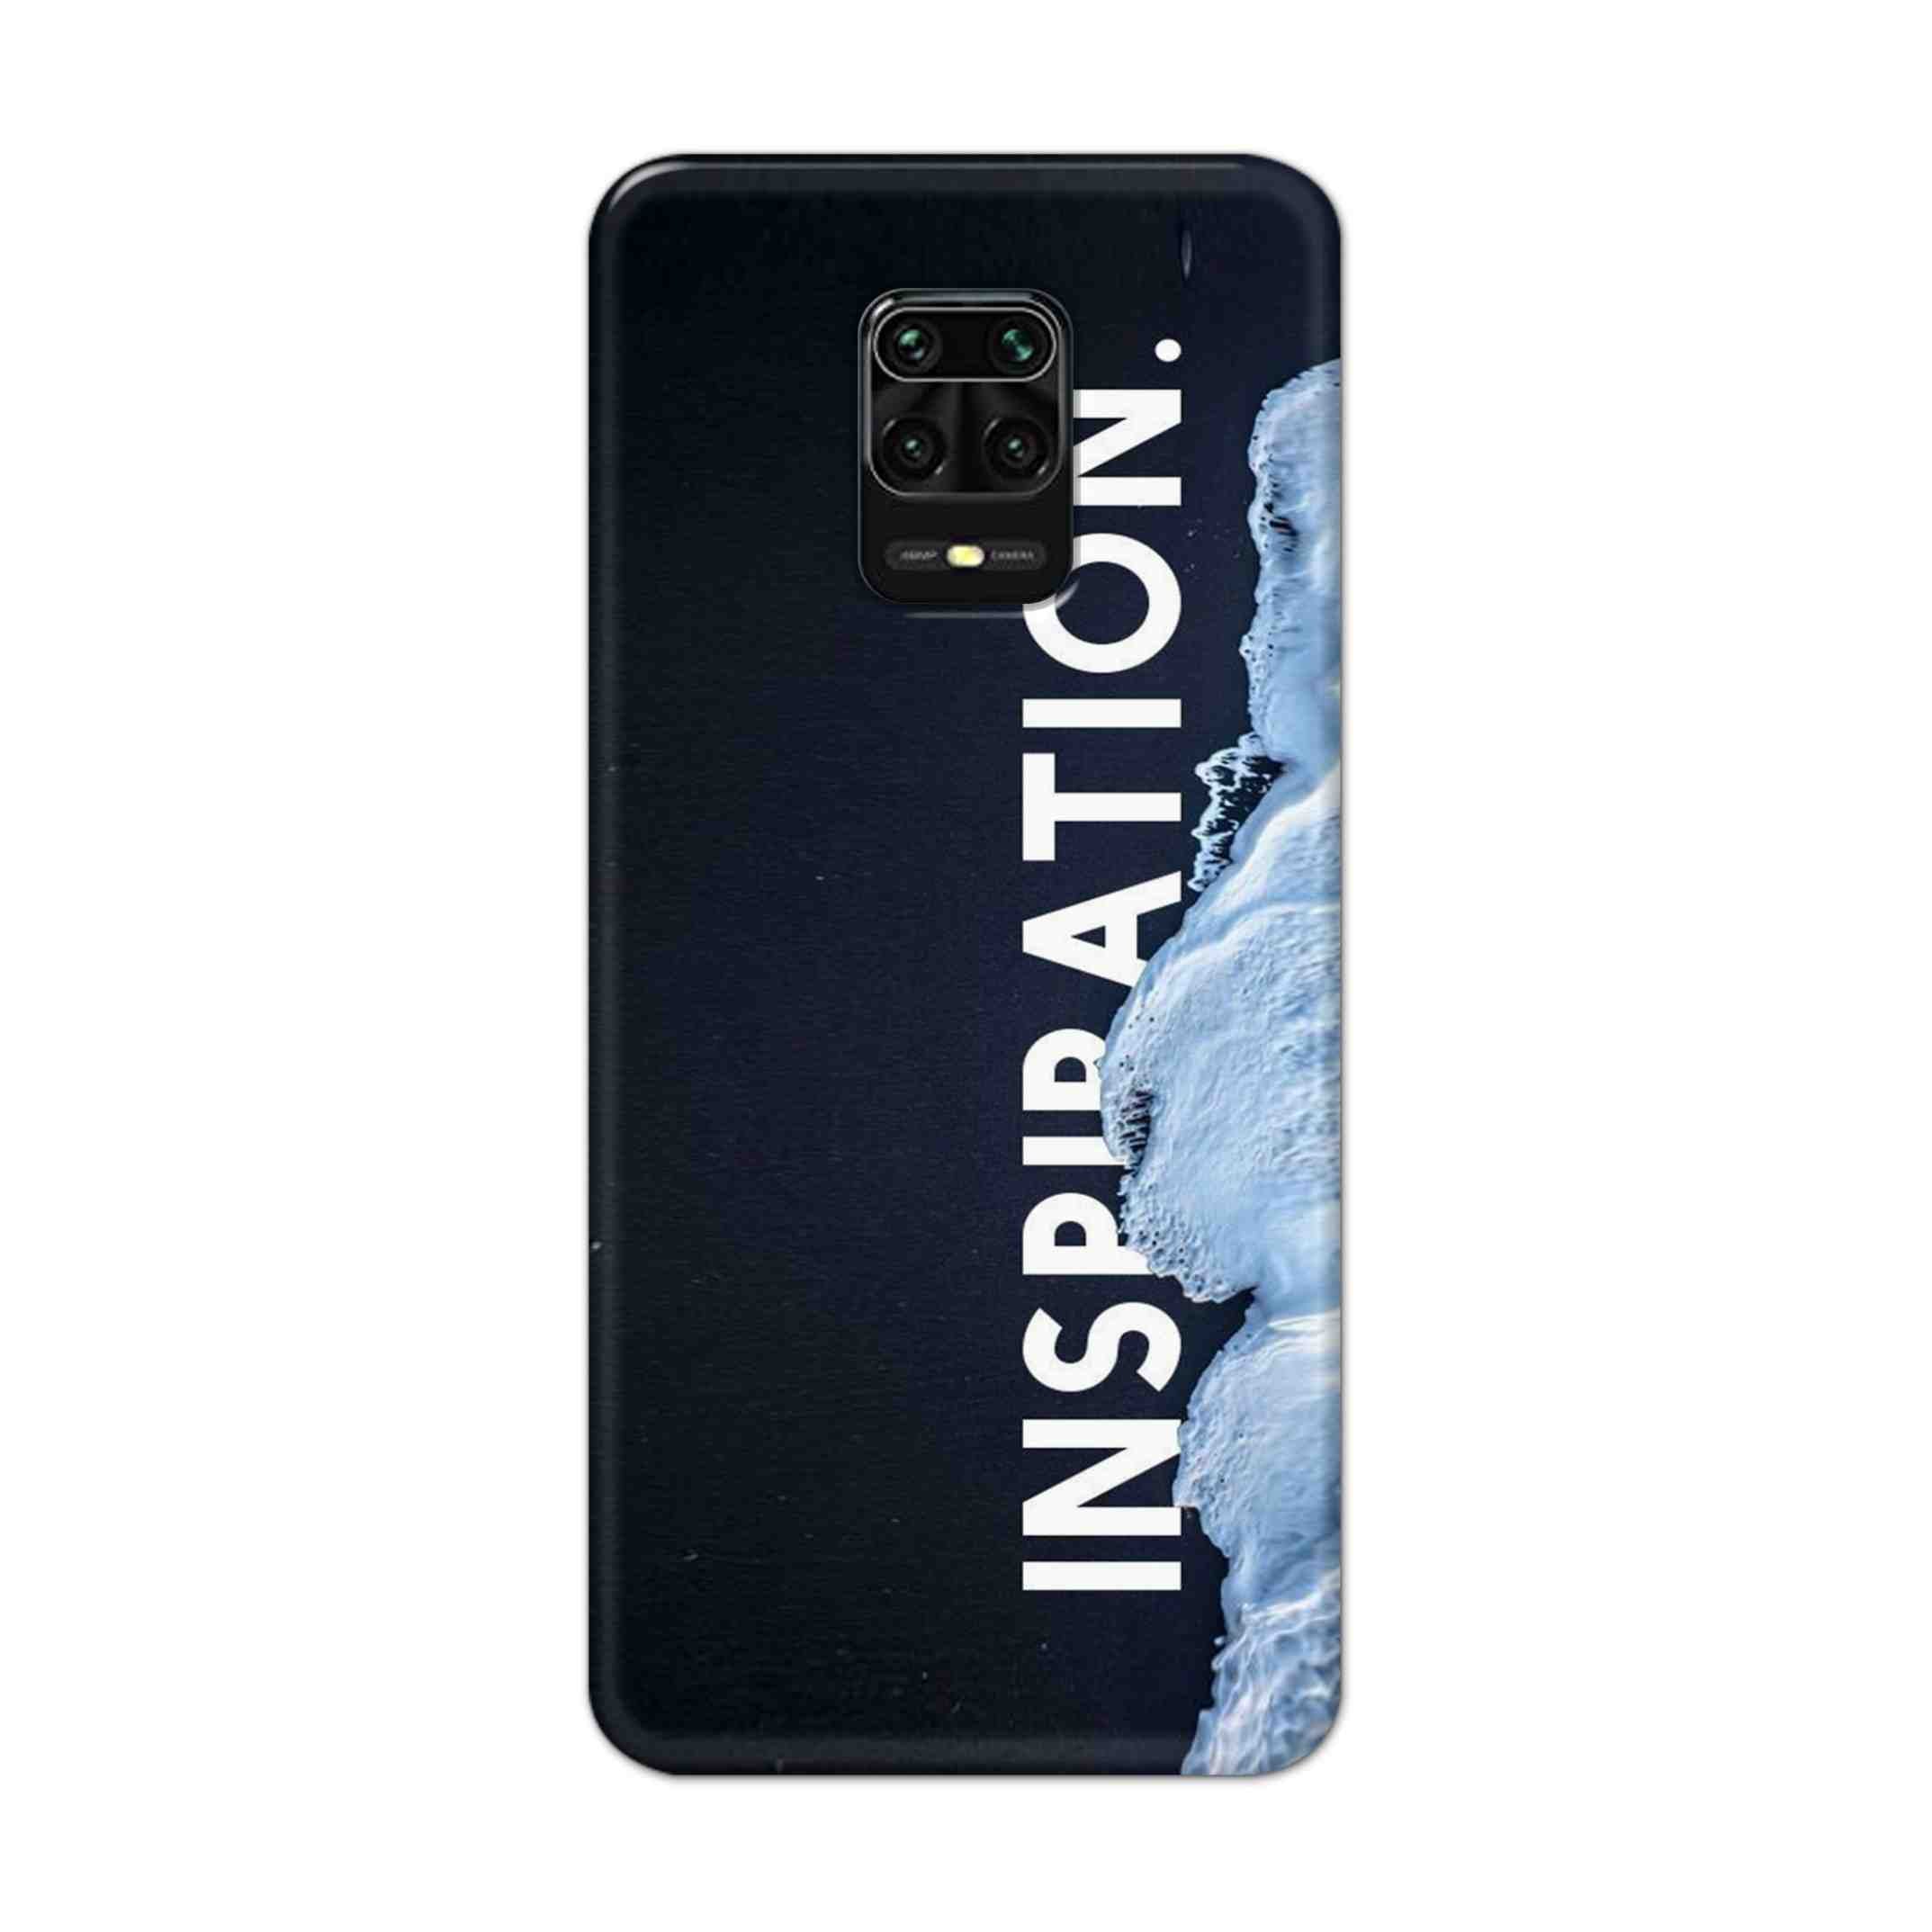 Buy Inspiration Hard Back Mobile Phone Case Cover For Redmi Note 9 Pro Online